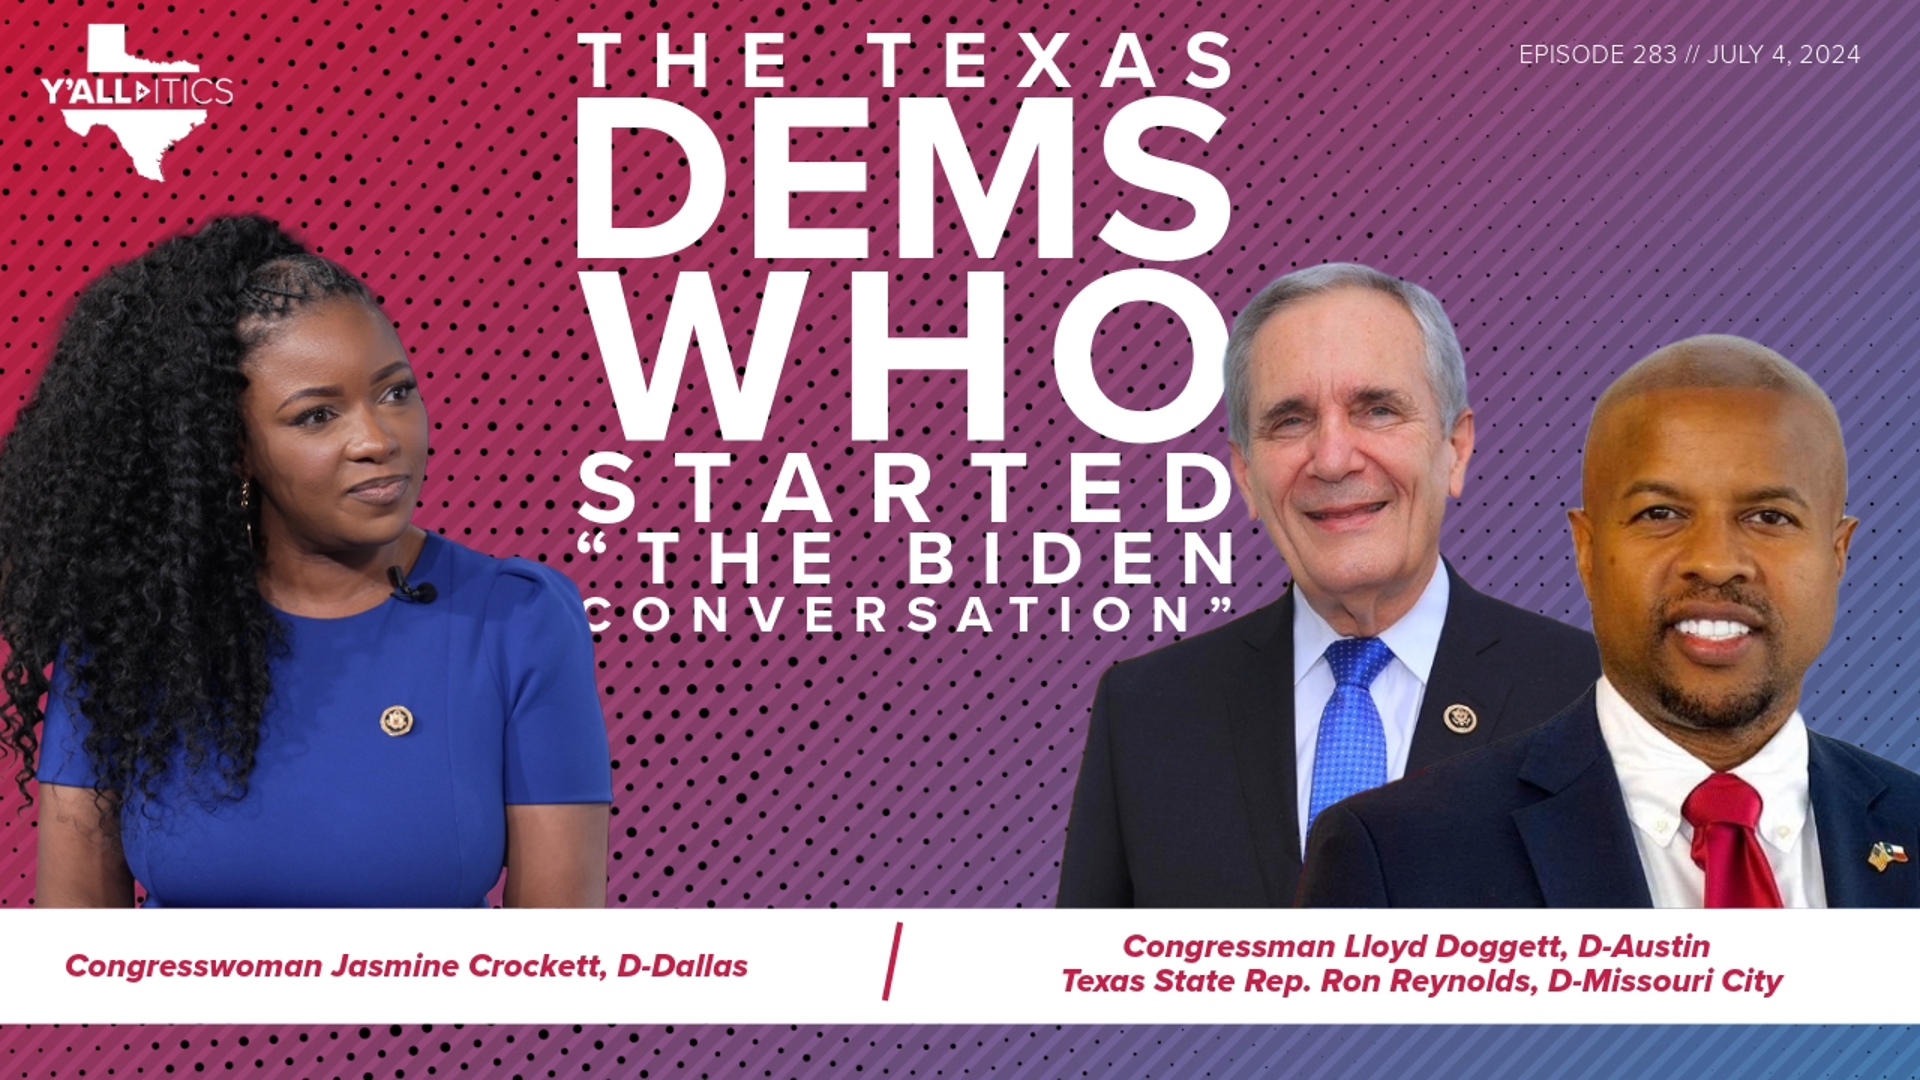 Texas Democrats are clashing over whether President Biden should remain in the race for the White House.